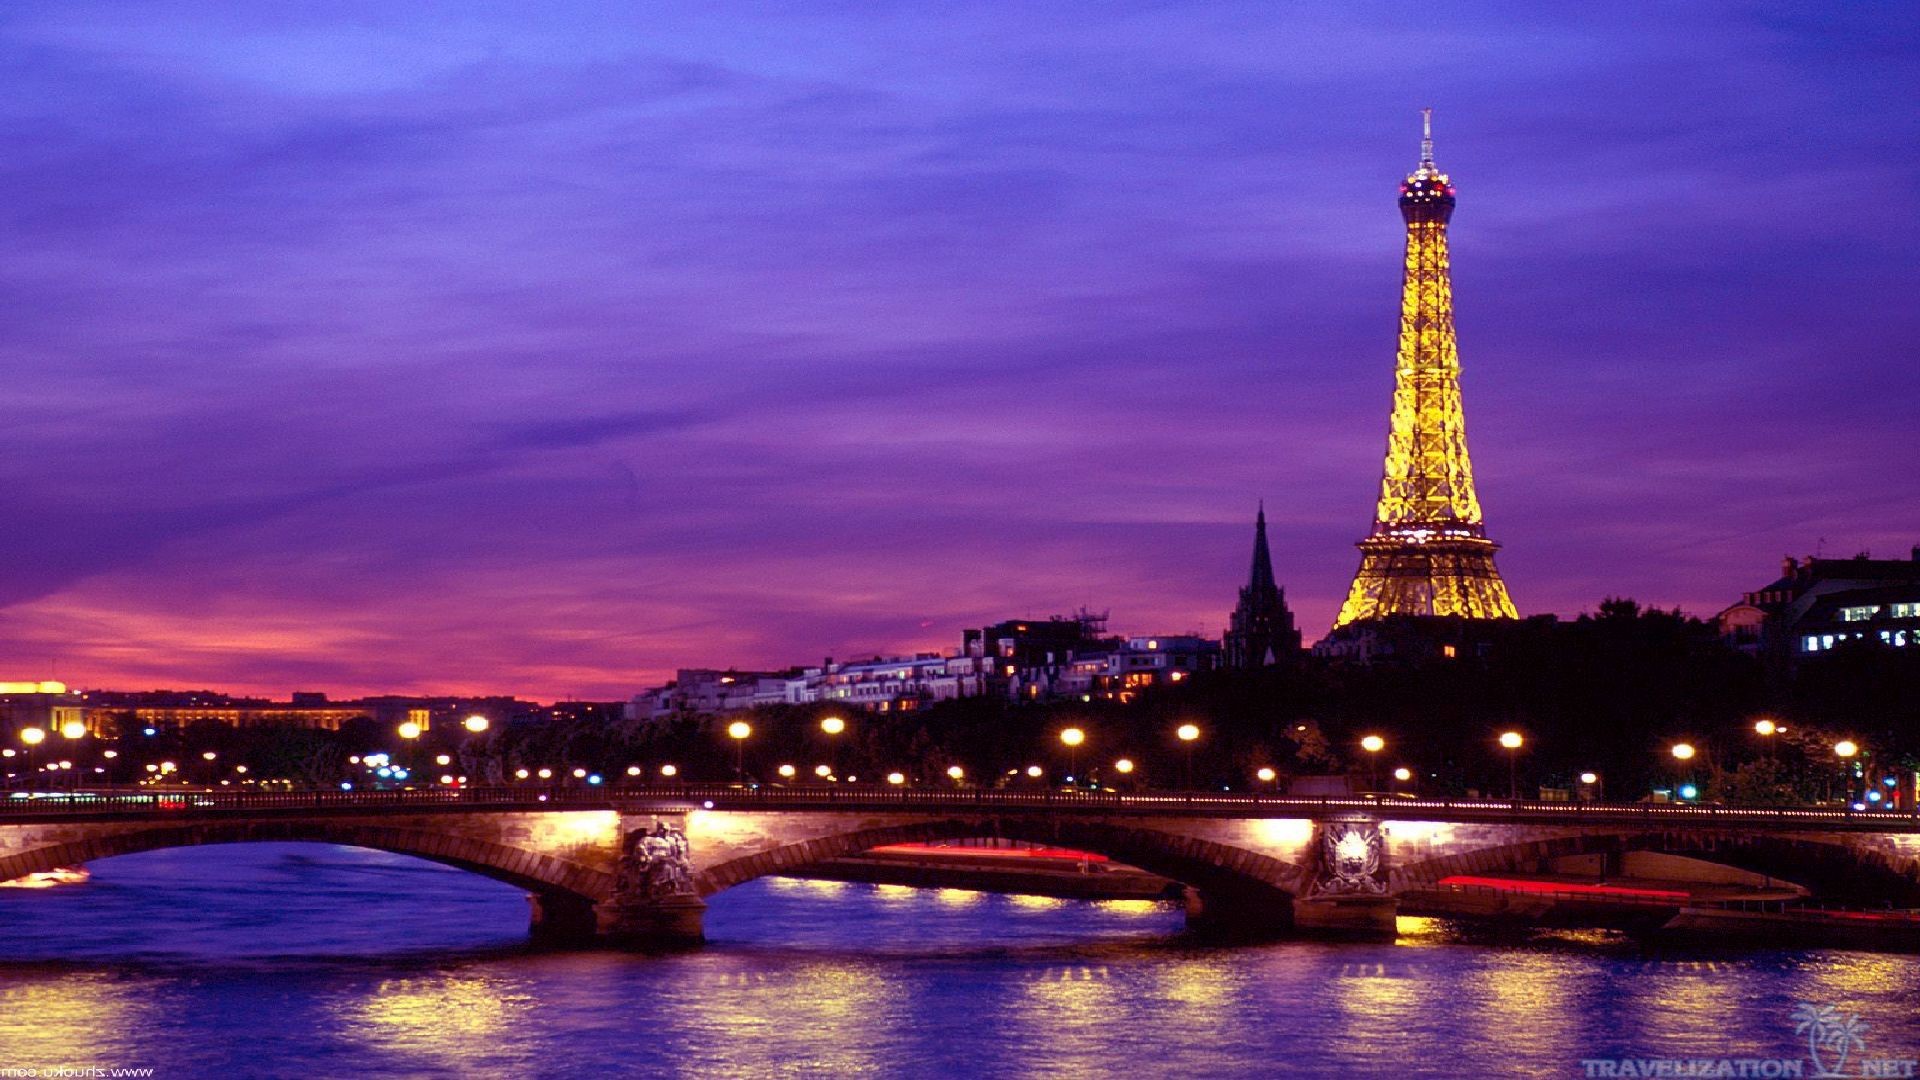 1920x1080 undefined Eiffel Tower Pictures Wallpapers (44 Wallpapers) | Adorable  Wallpapers